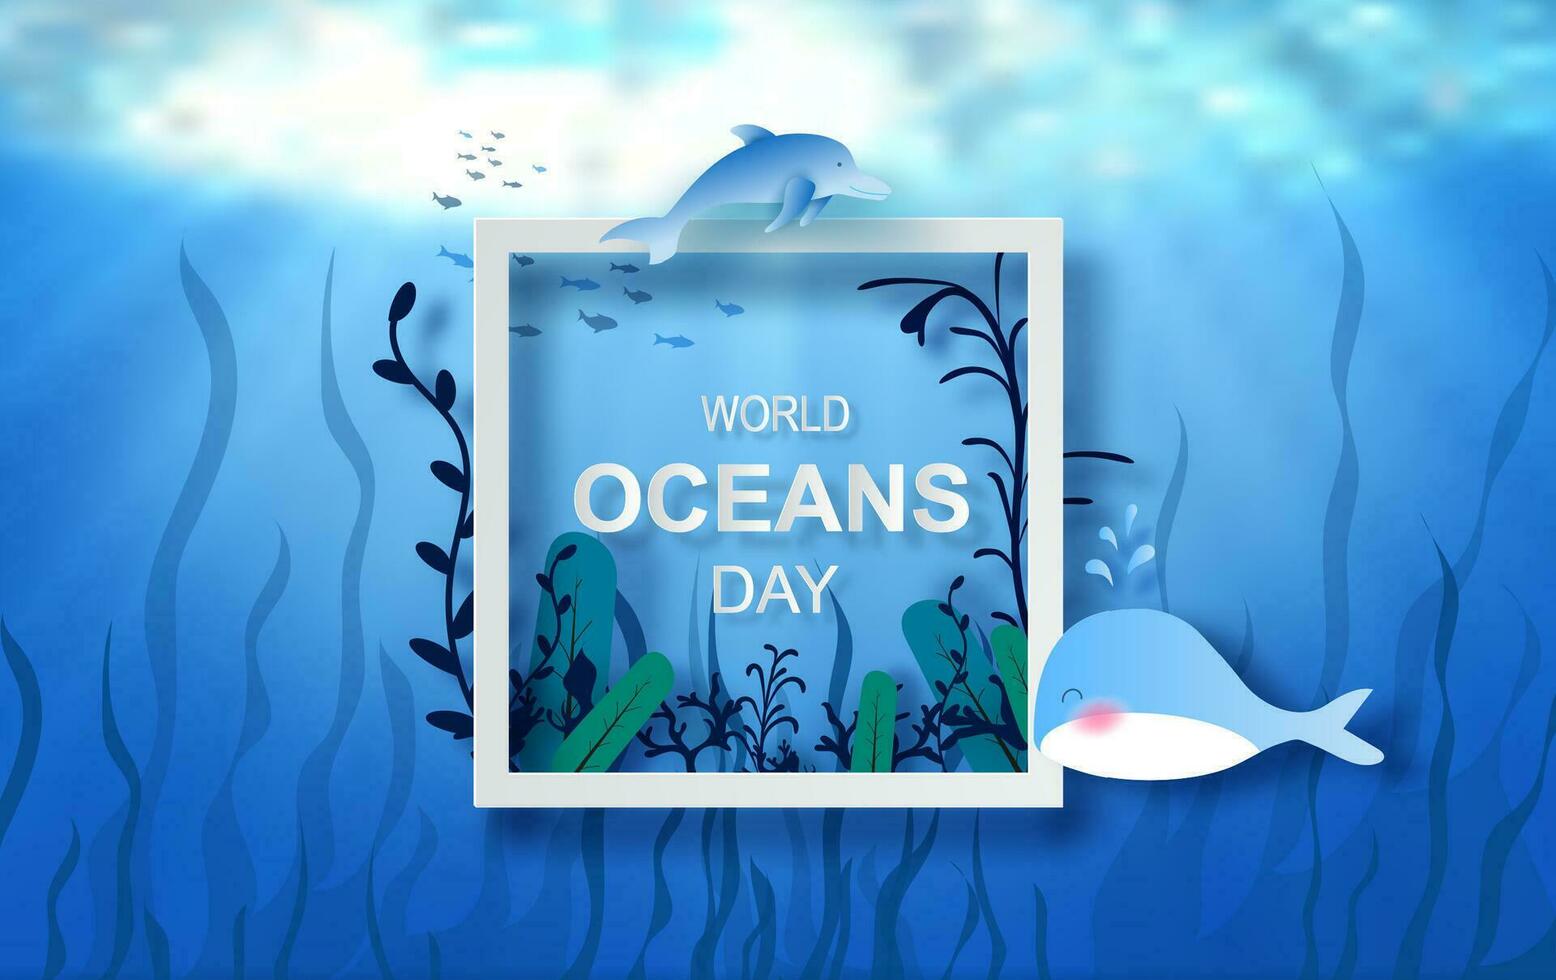 Drop of water concept of World Oceans Day. Celebration dedicated to help protect sea earth and conserve water ecosystem. Blue origami craft paper of sea waves.Underwater frame poster background vector